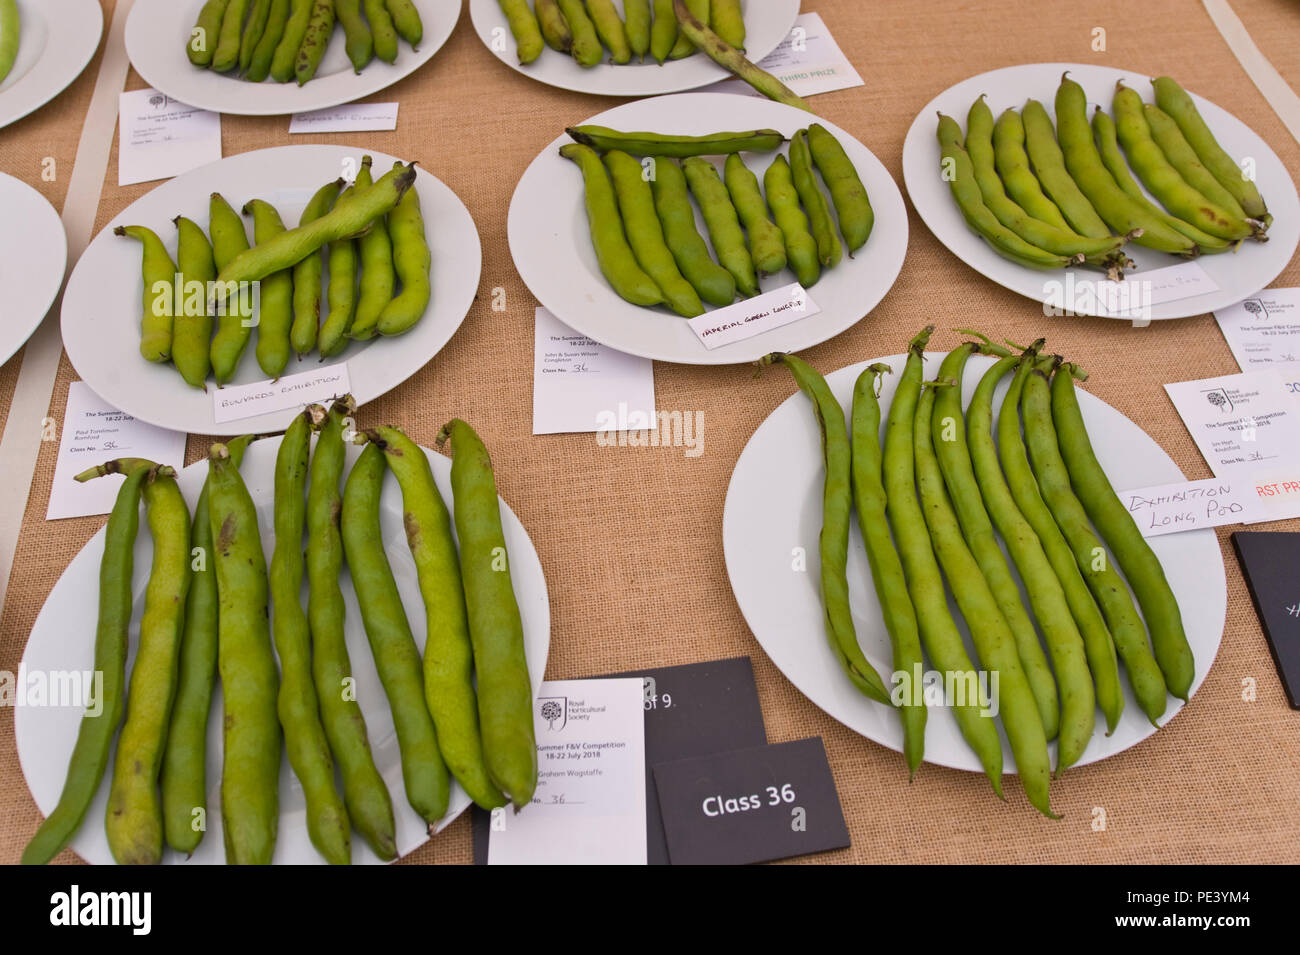 Broad beans exhibited at RHS Tatton Park flower show Cheshire England UK Stock Photo